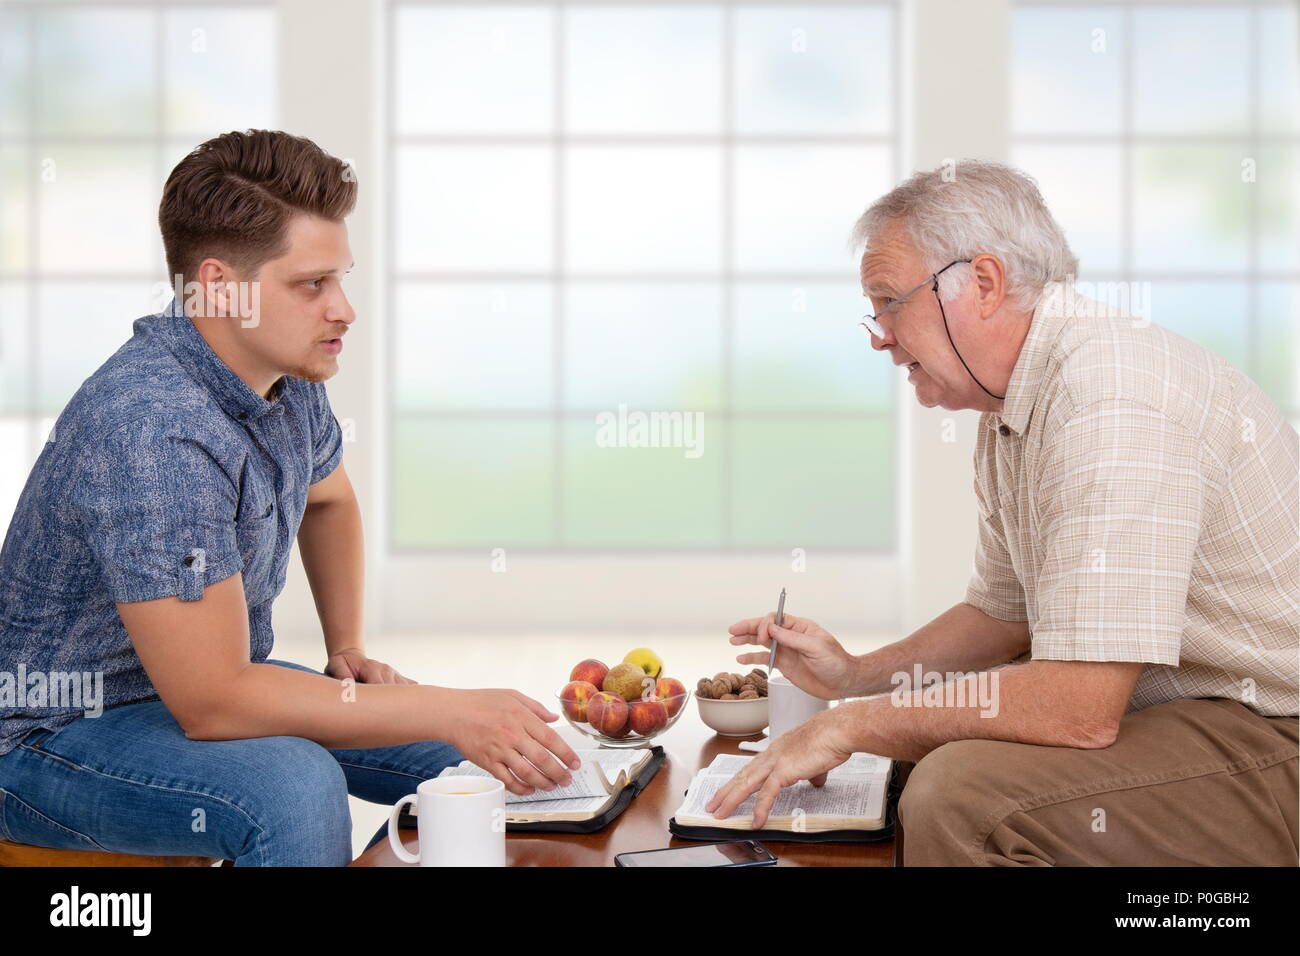 Church servant doing spiritual counseling to a young man studying the Bible Stock Photo